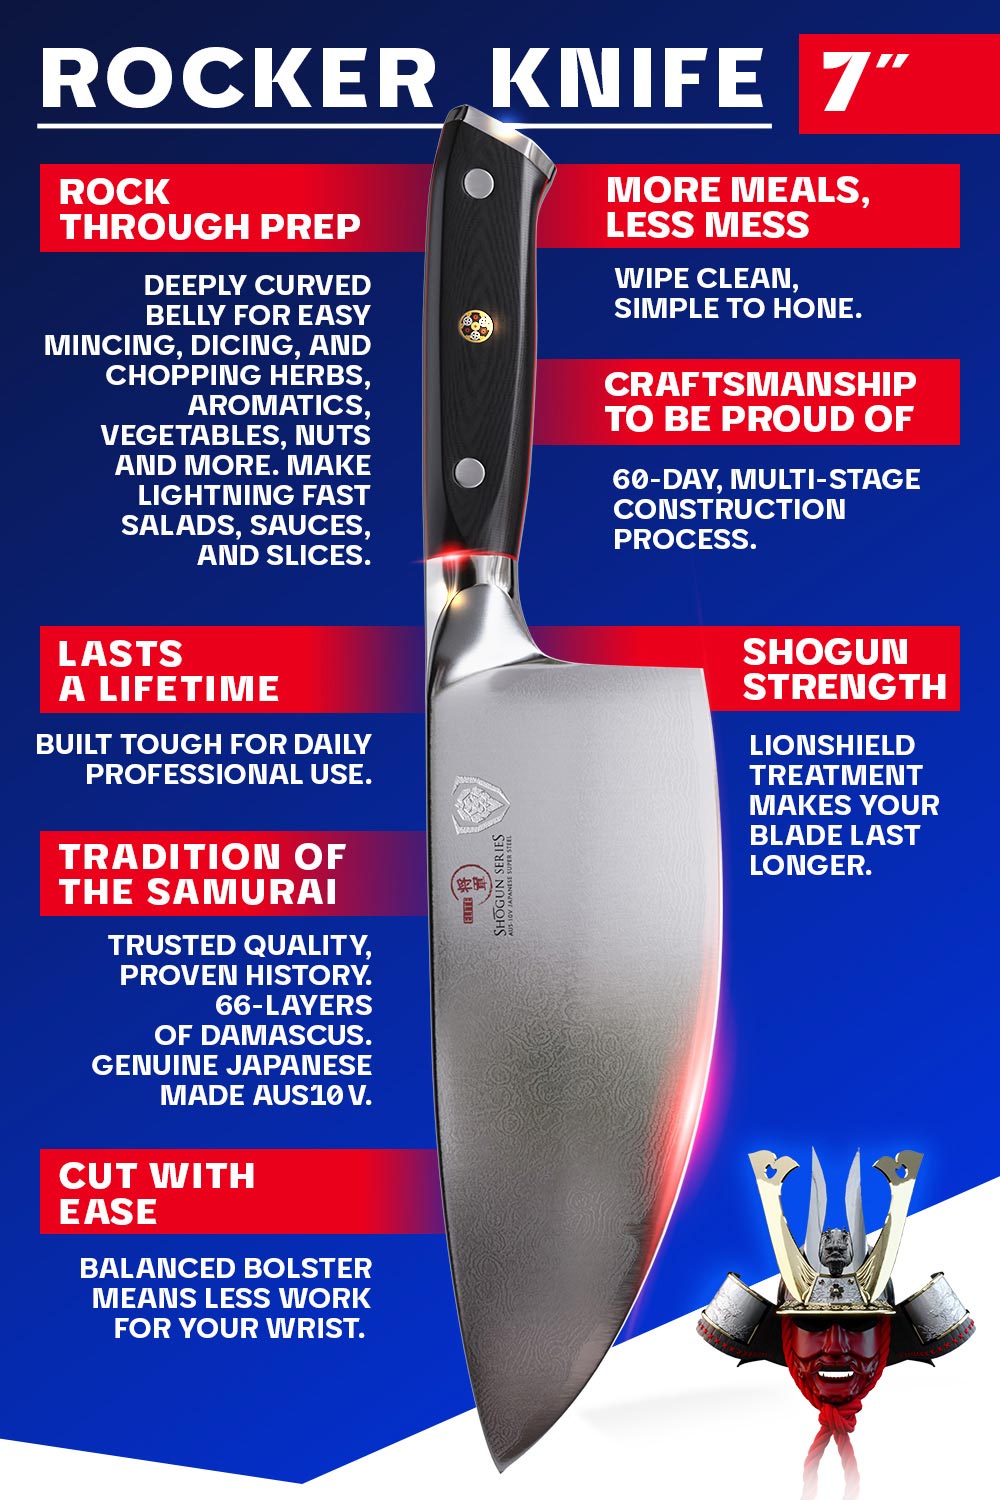 Butcher Knife Set - The Quick & Easy Guide